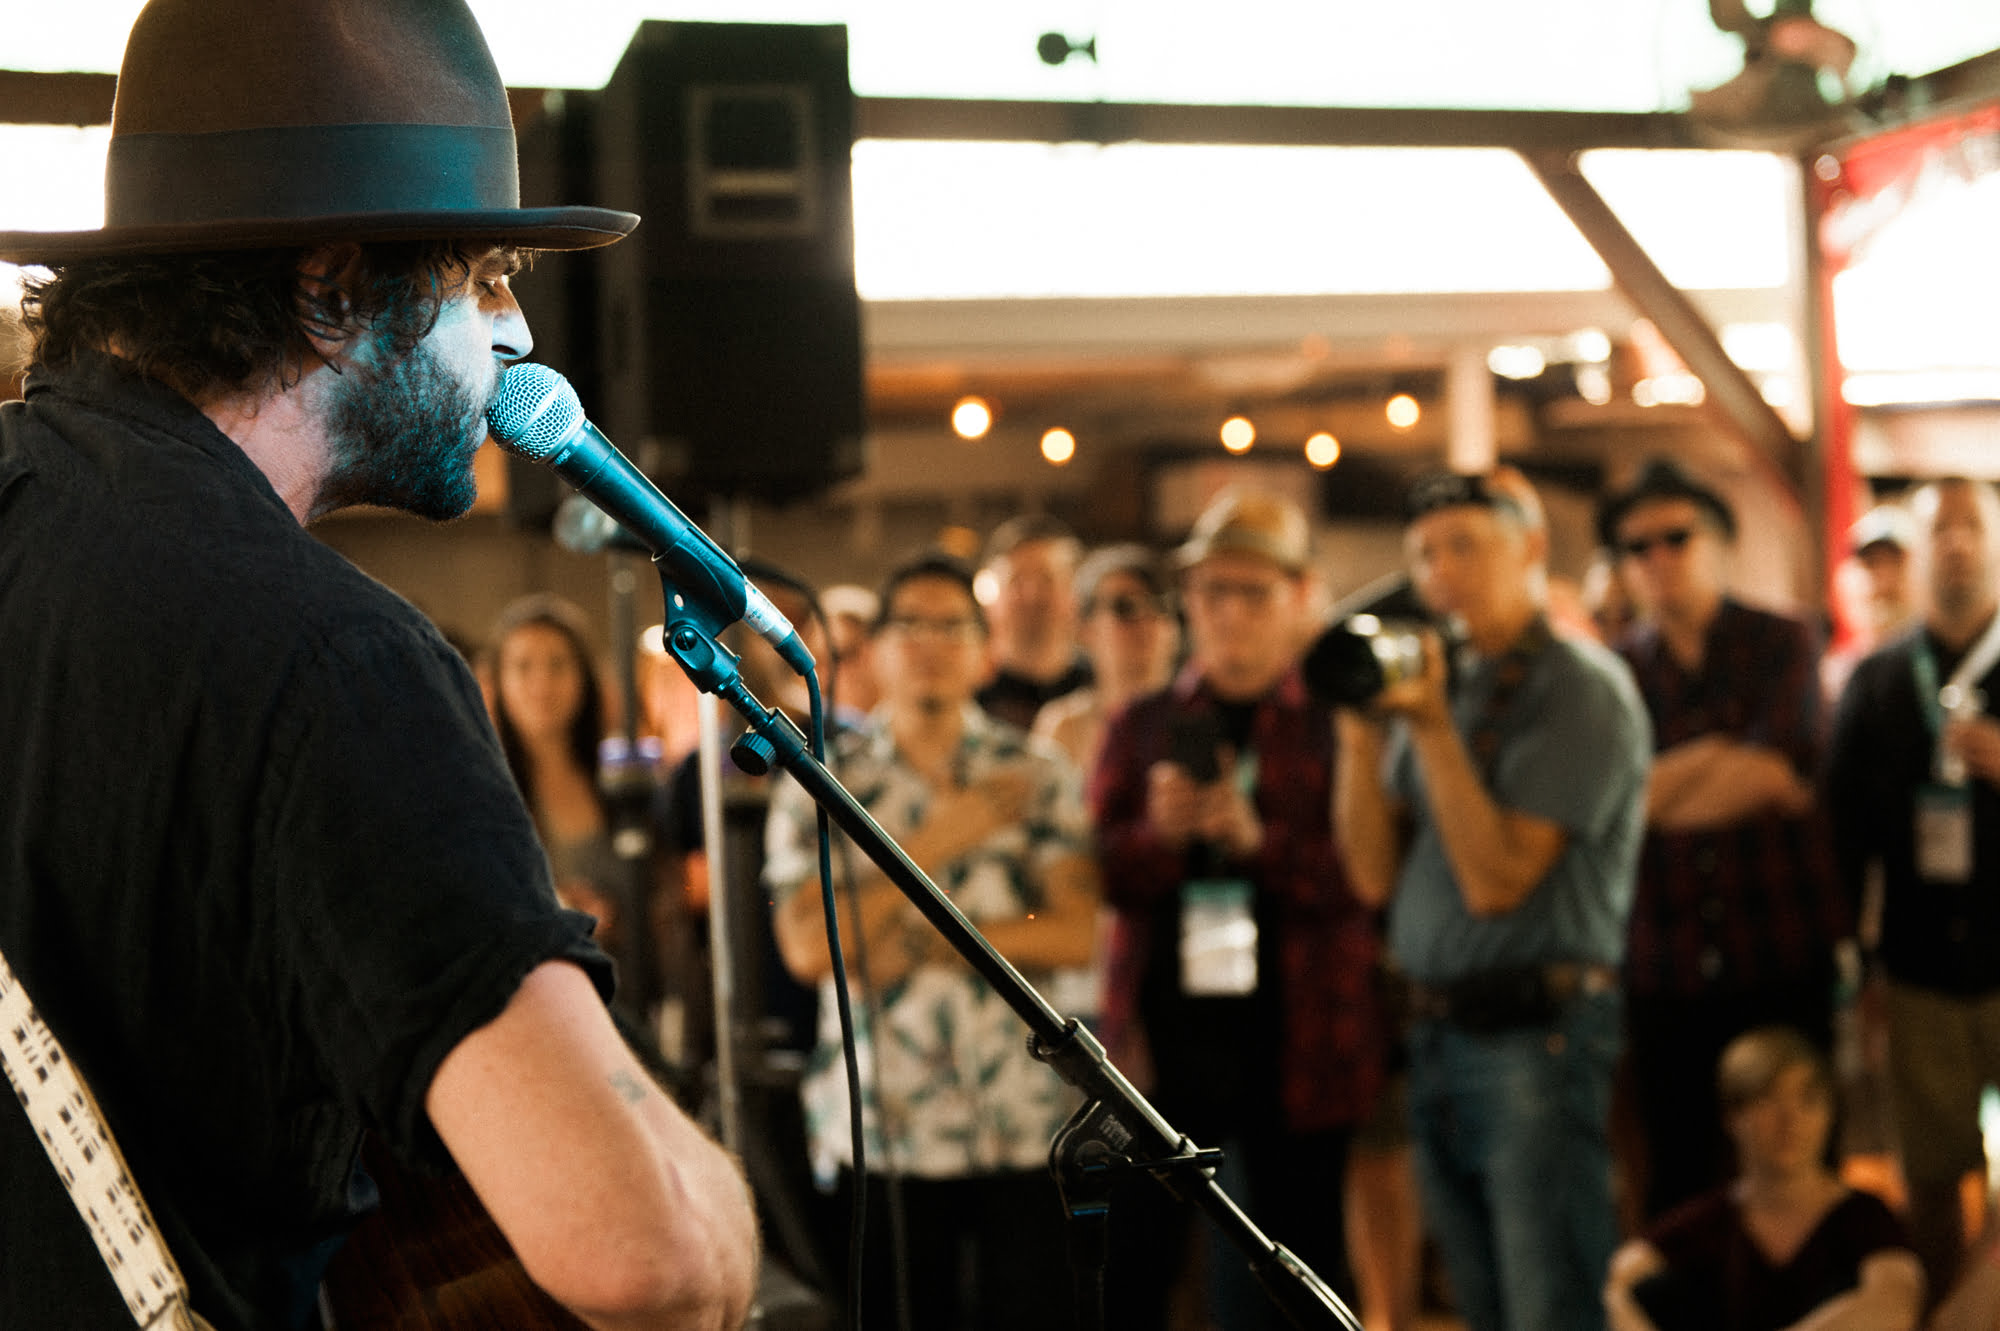 RECAP: The Brooklyn Country Cantina at SXSW 2017